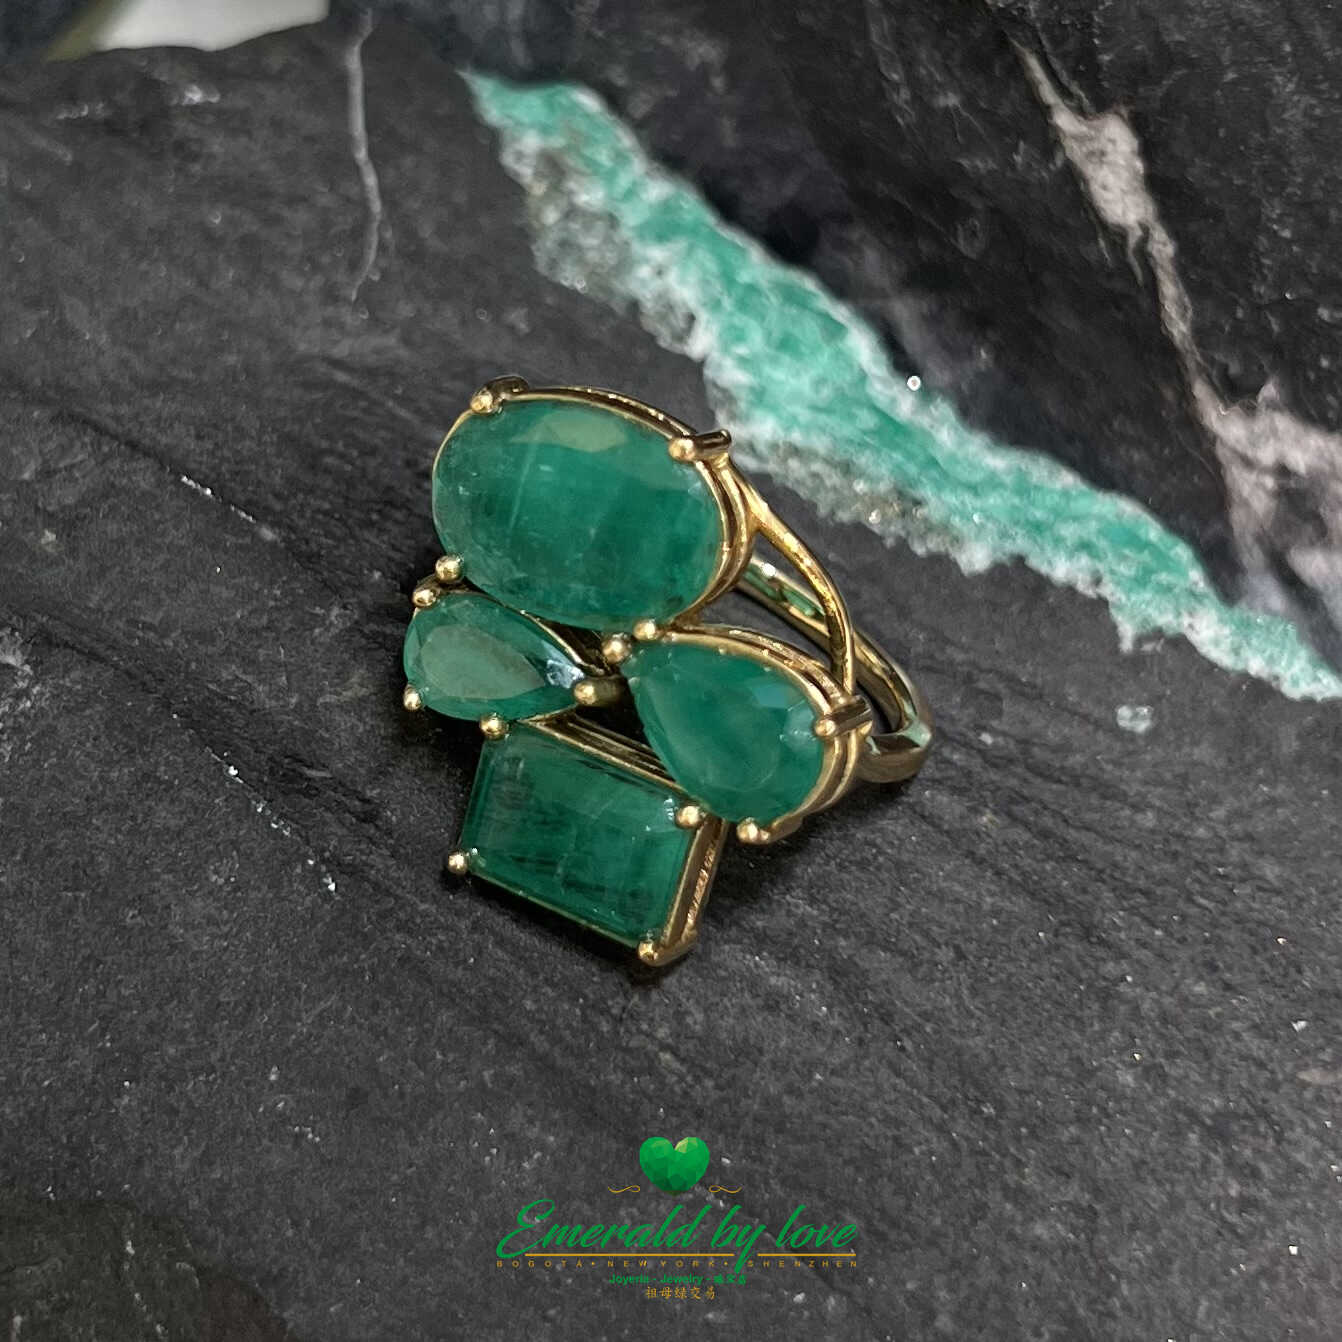 Whimsical Yellow Gold Crazy emeralds Ring